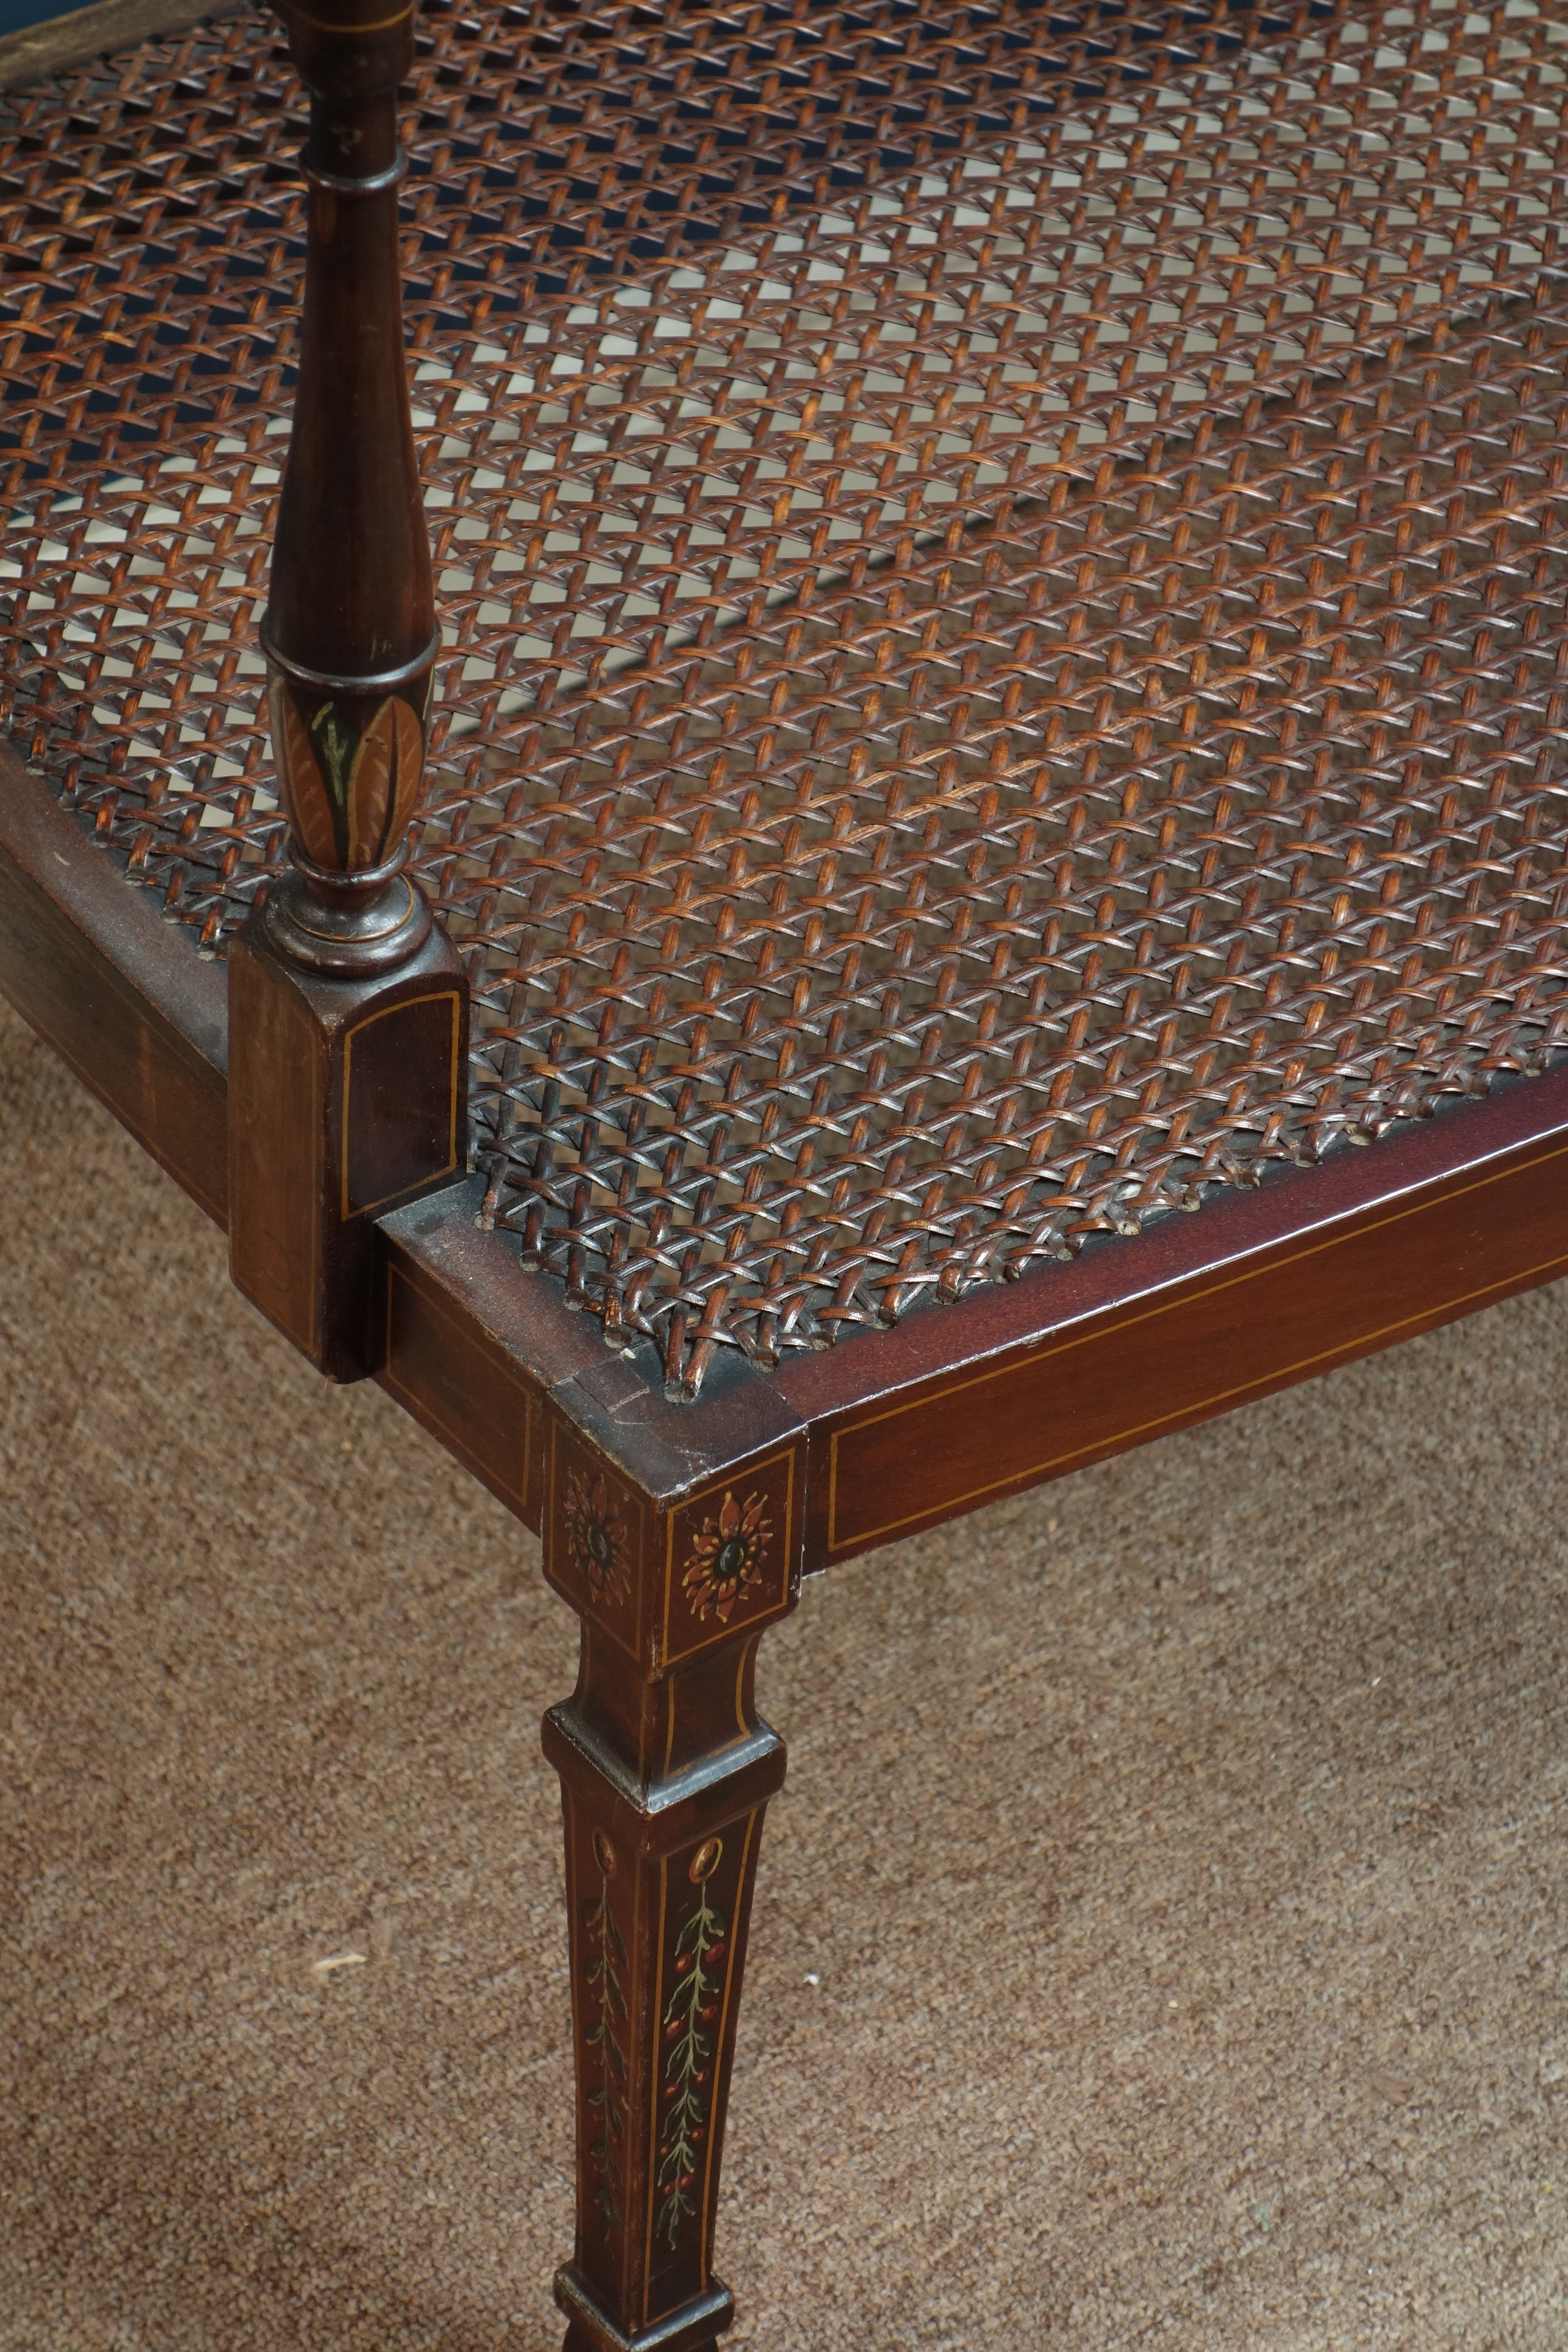 Edwardian inlaid mahogany settee, Neo classical style painting, cane seat with upholstered cushion, - Image 3 of 3